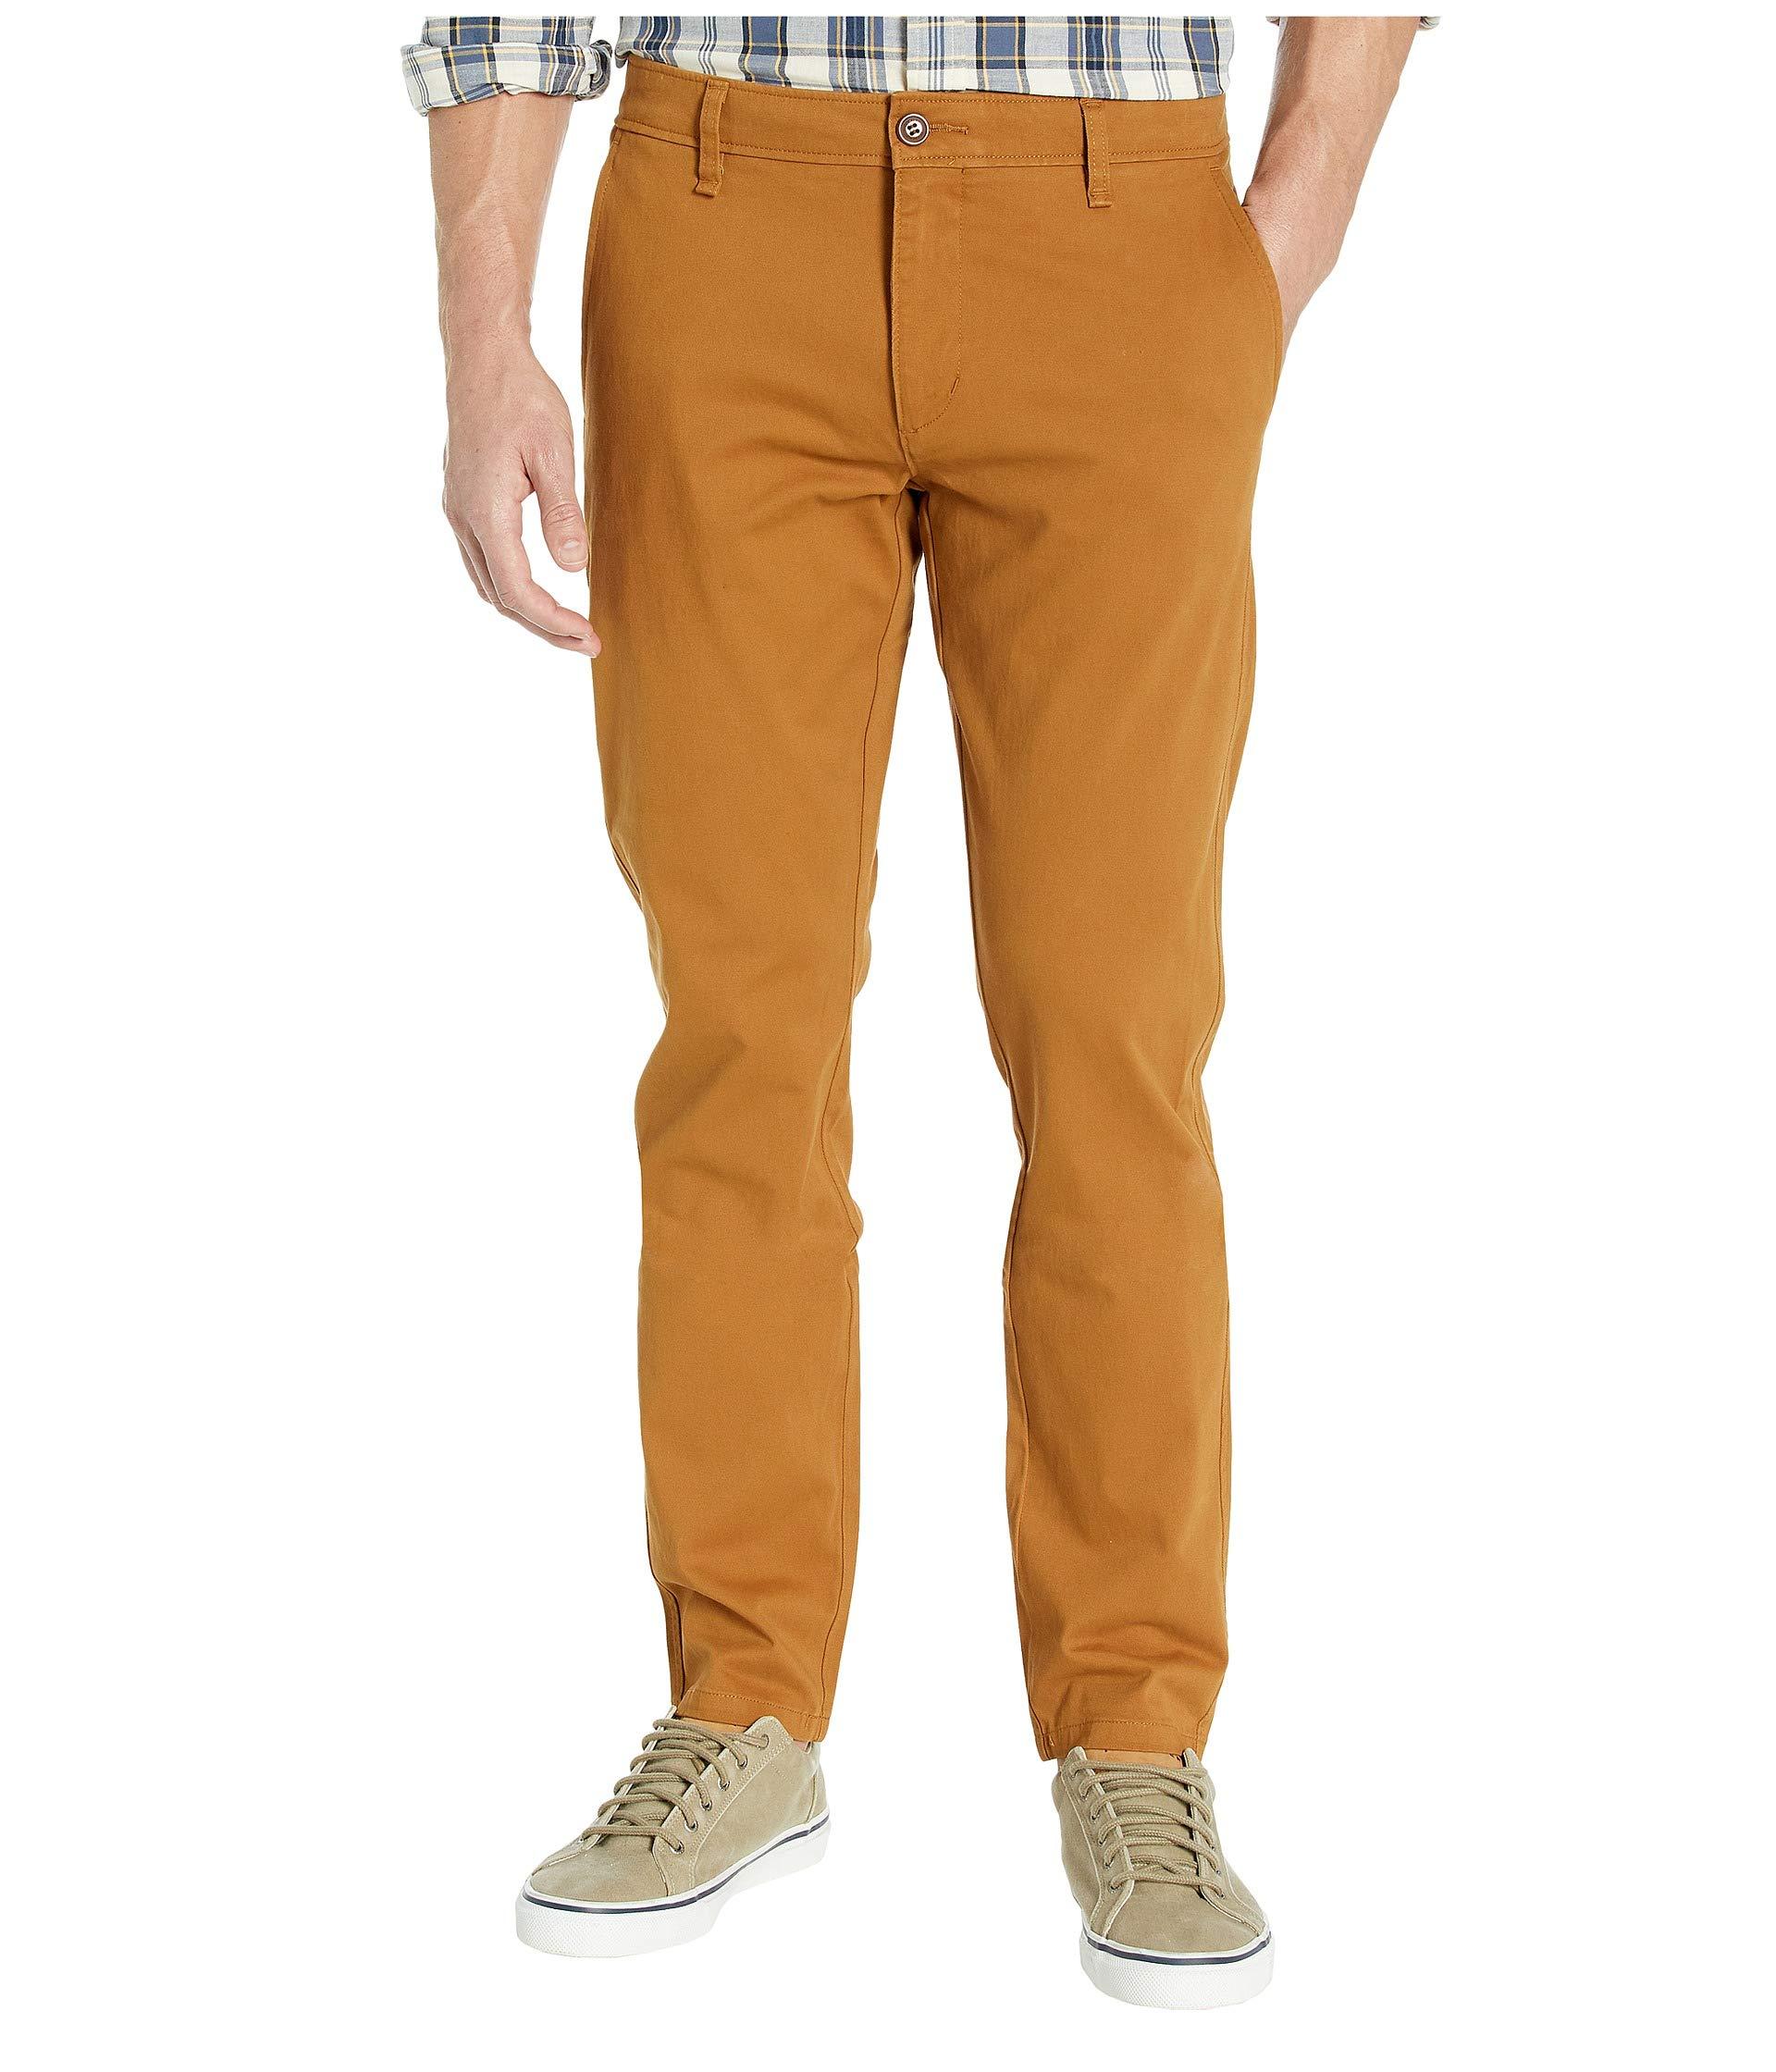 Dockers Cotton Slim Fit Ultimate Chino Pants With Smart 360 Flex in Tan ...